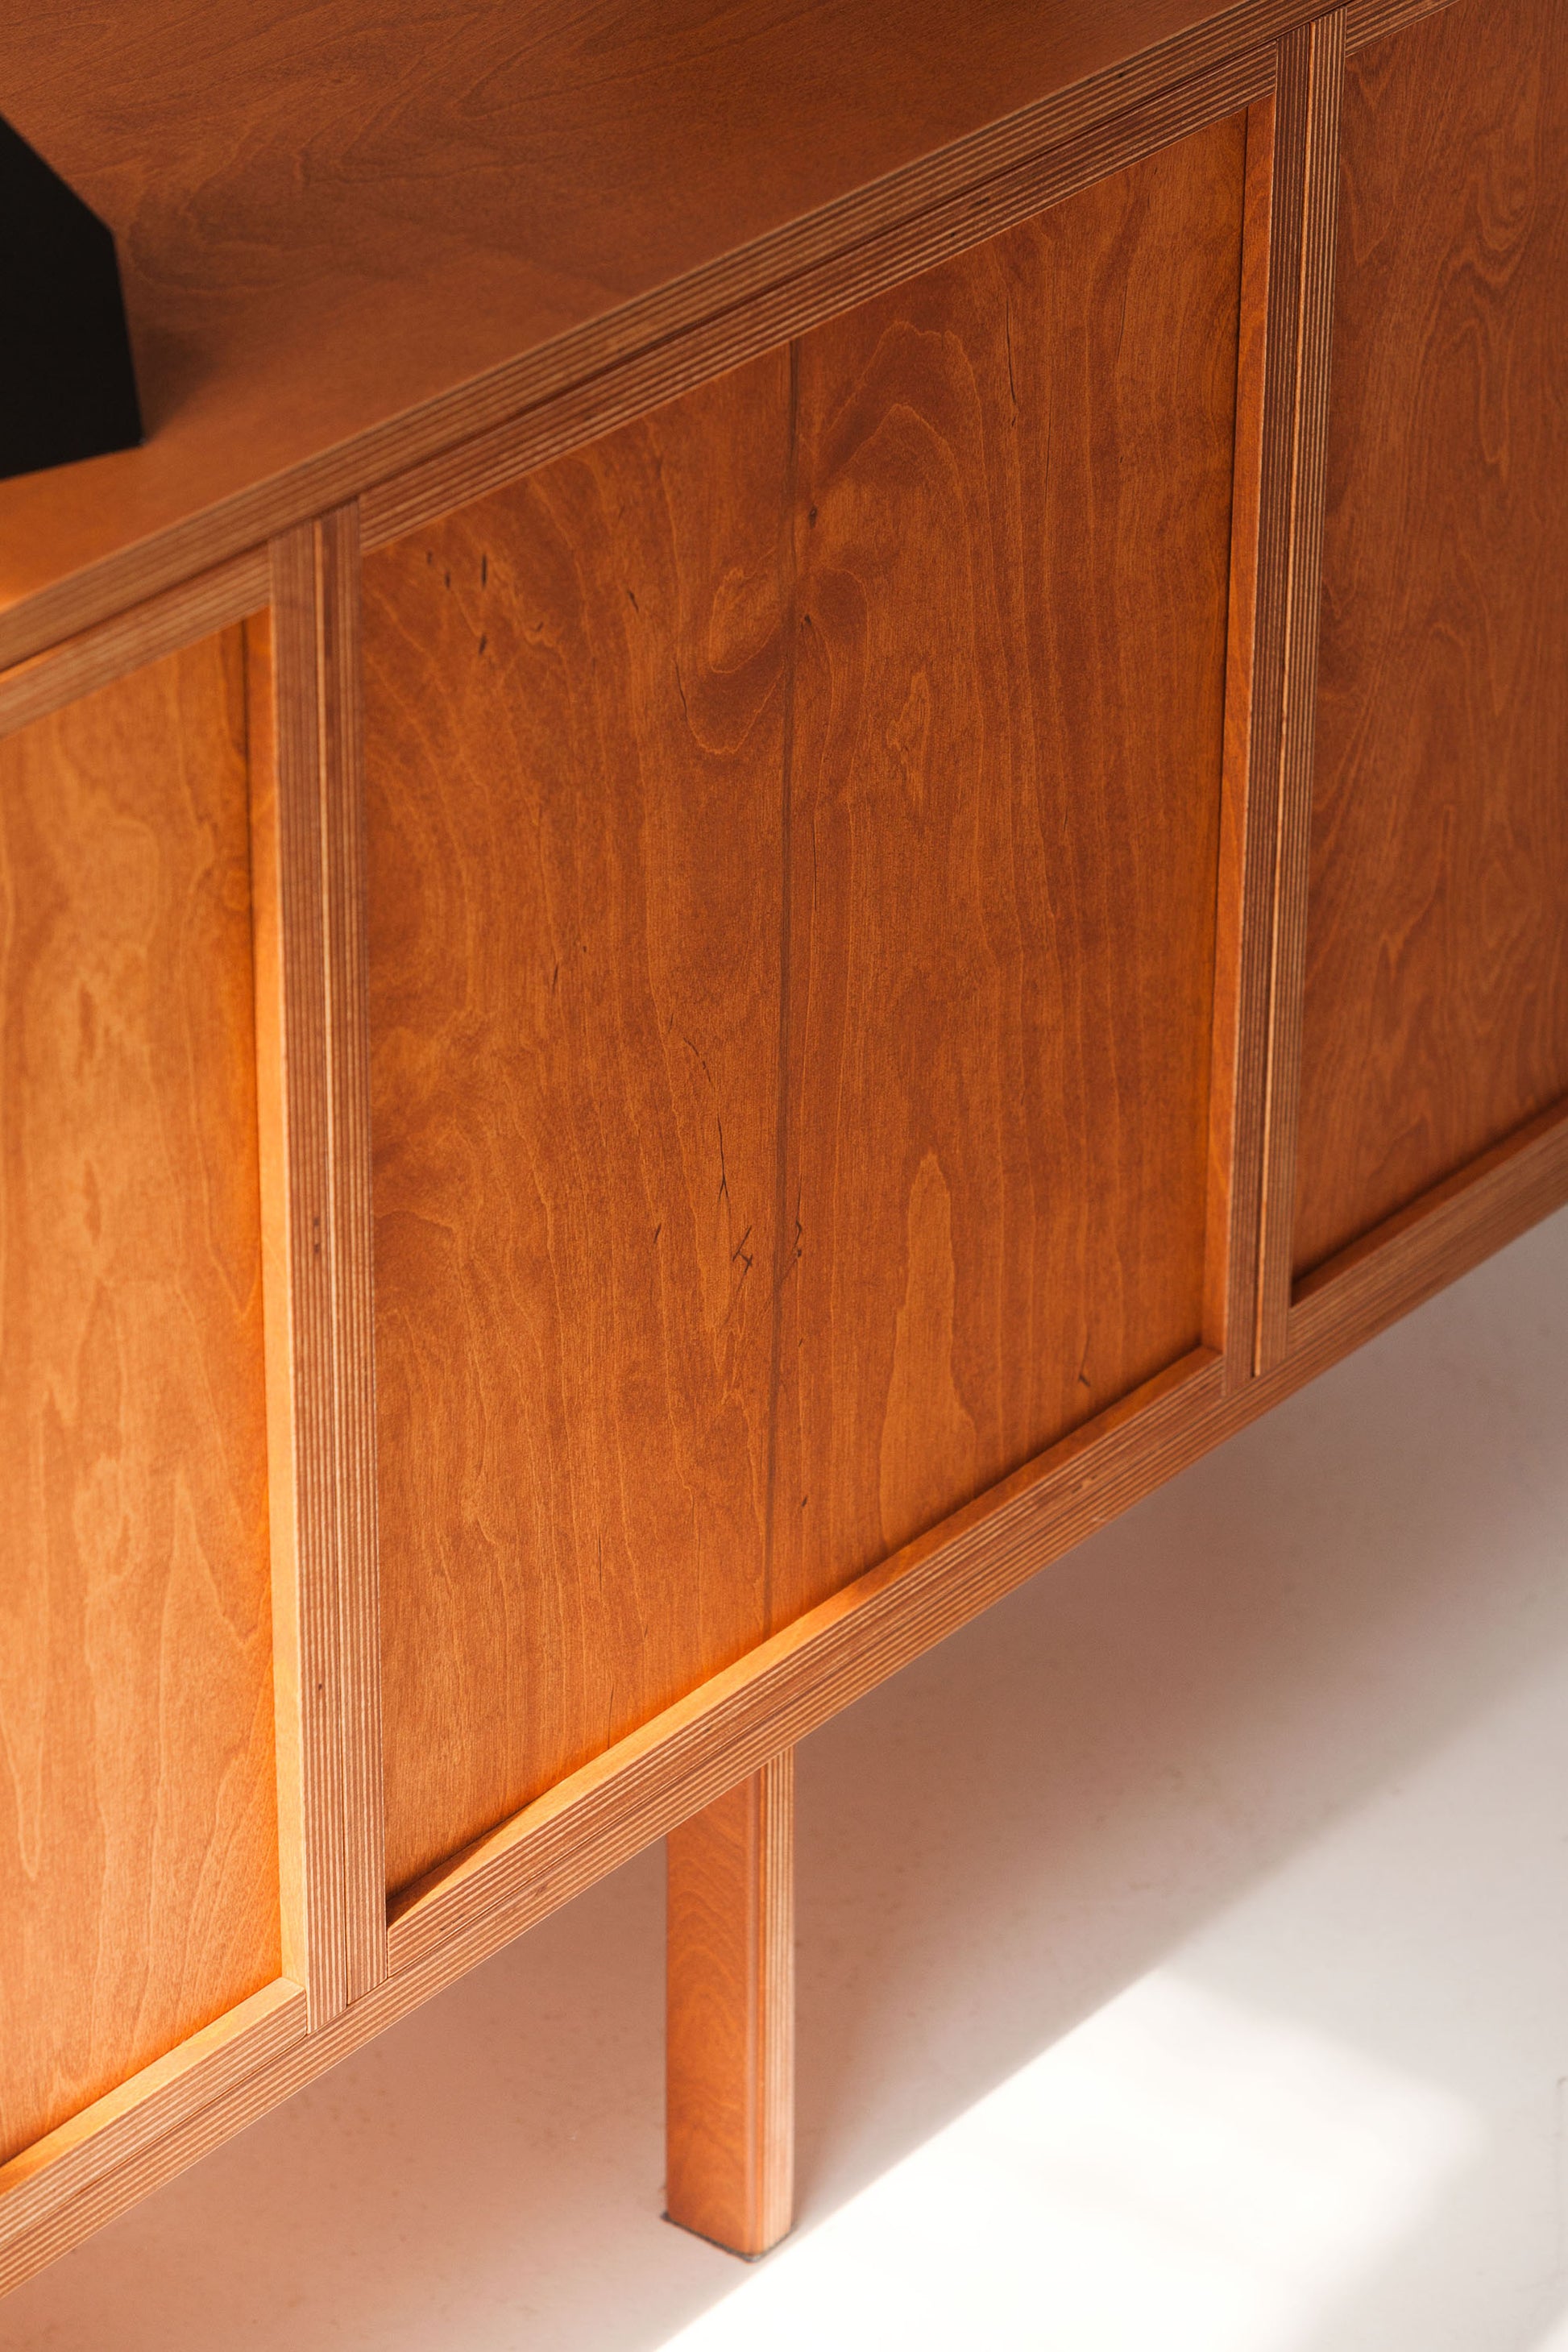 back-of-the-wooden-teak-mid-century-record-cabinet